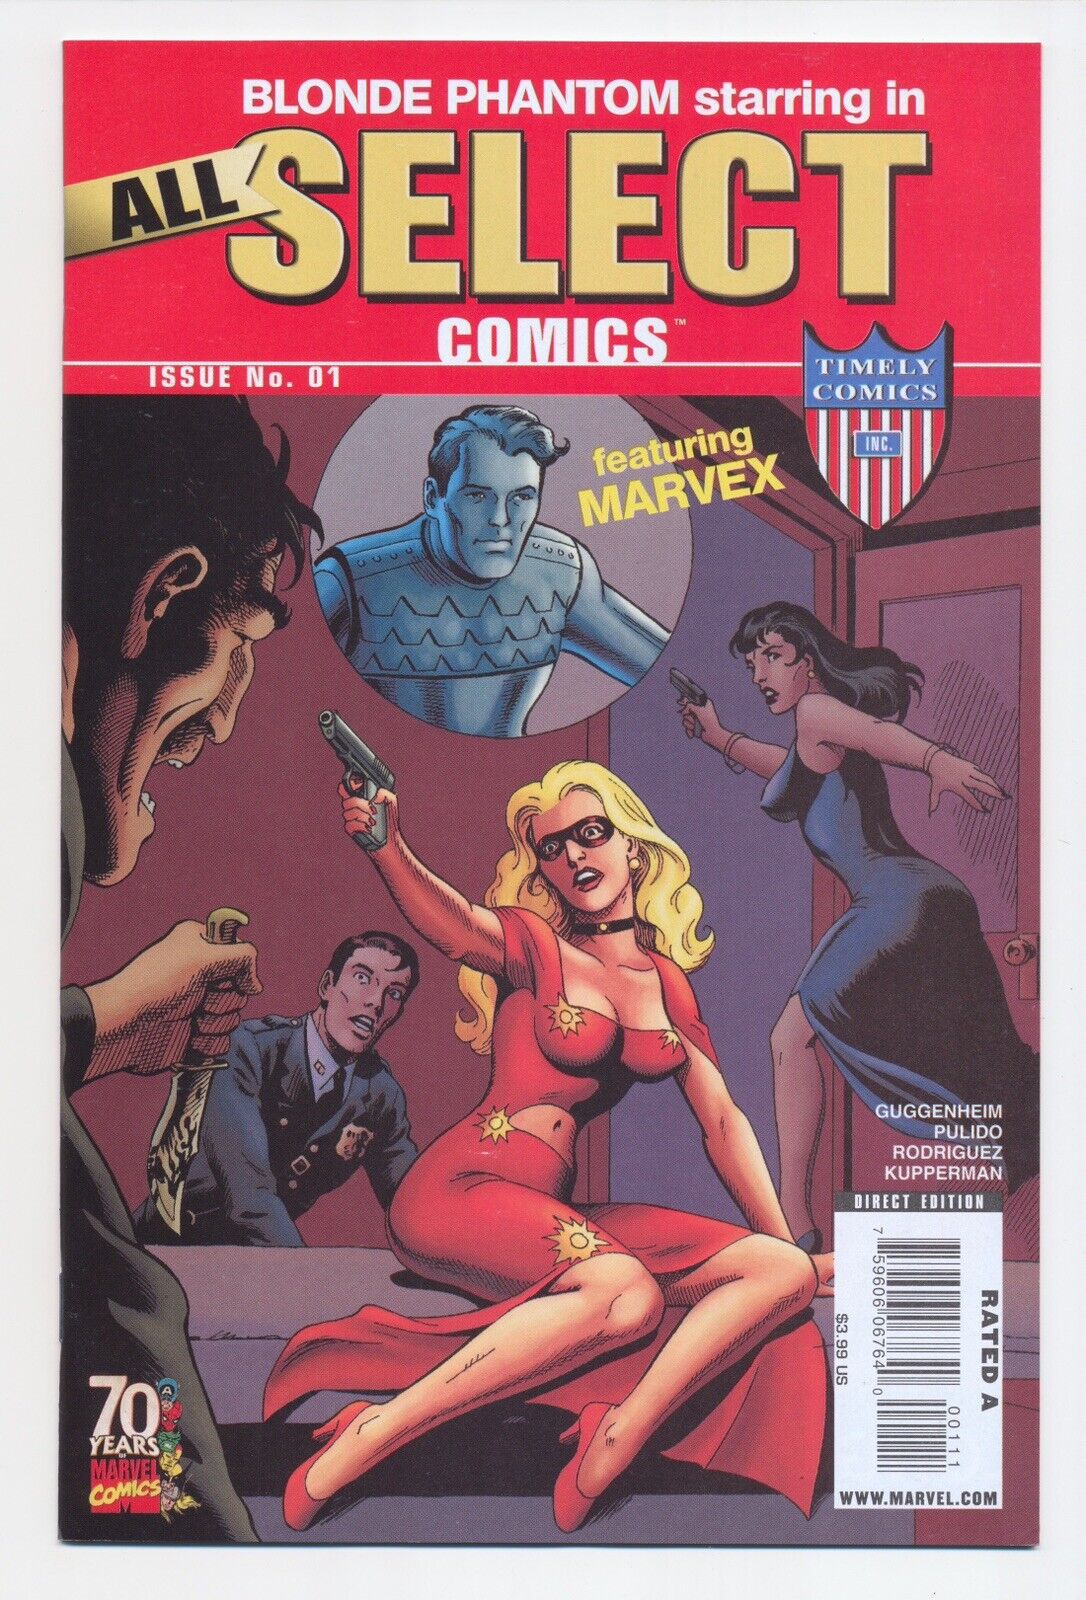 All Select Comics #1 70th Anniversary Special Blonde Phantom VF/NM Taylor Swift